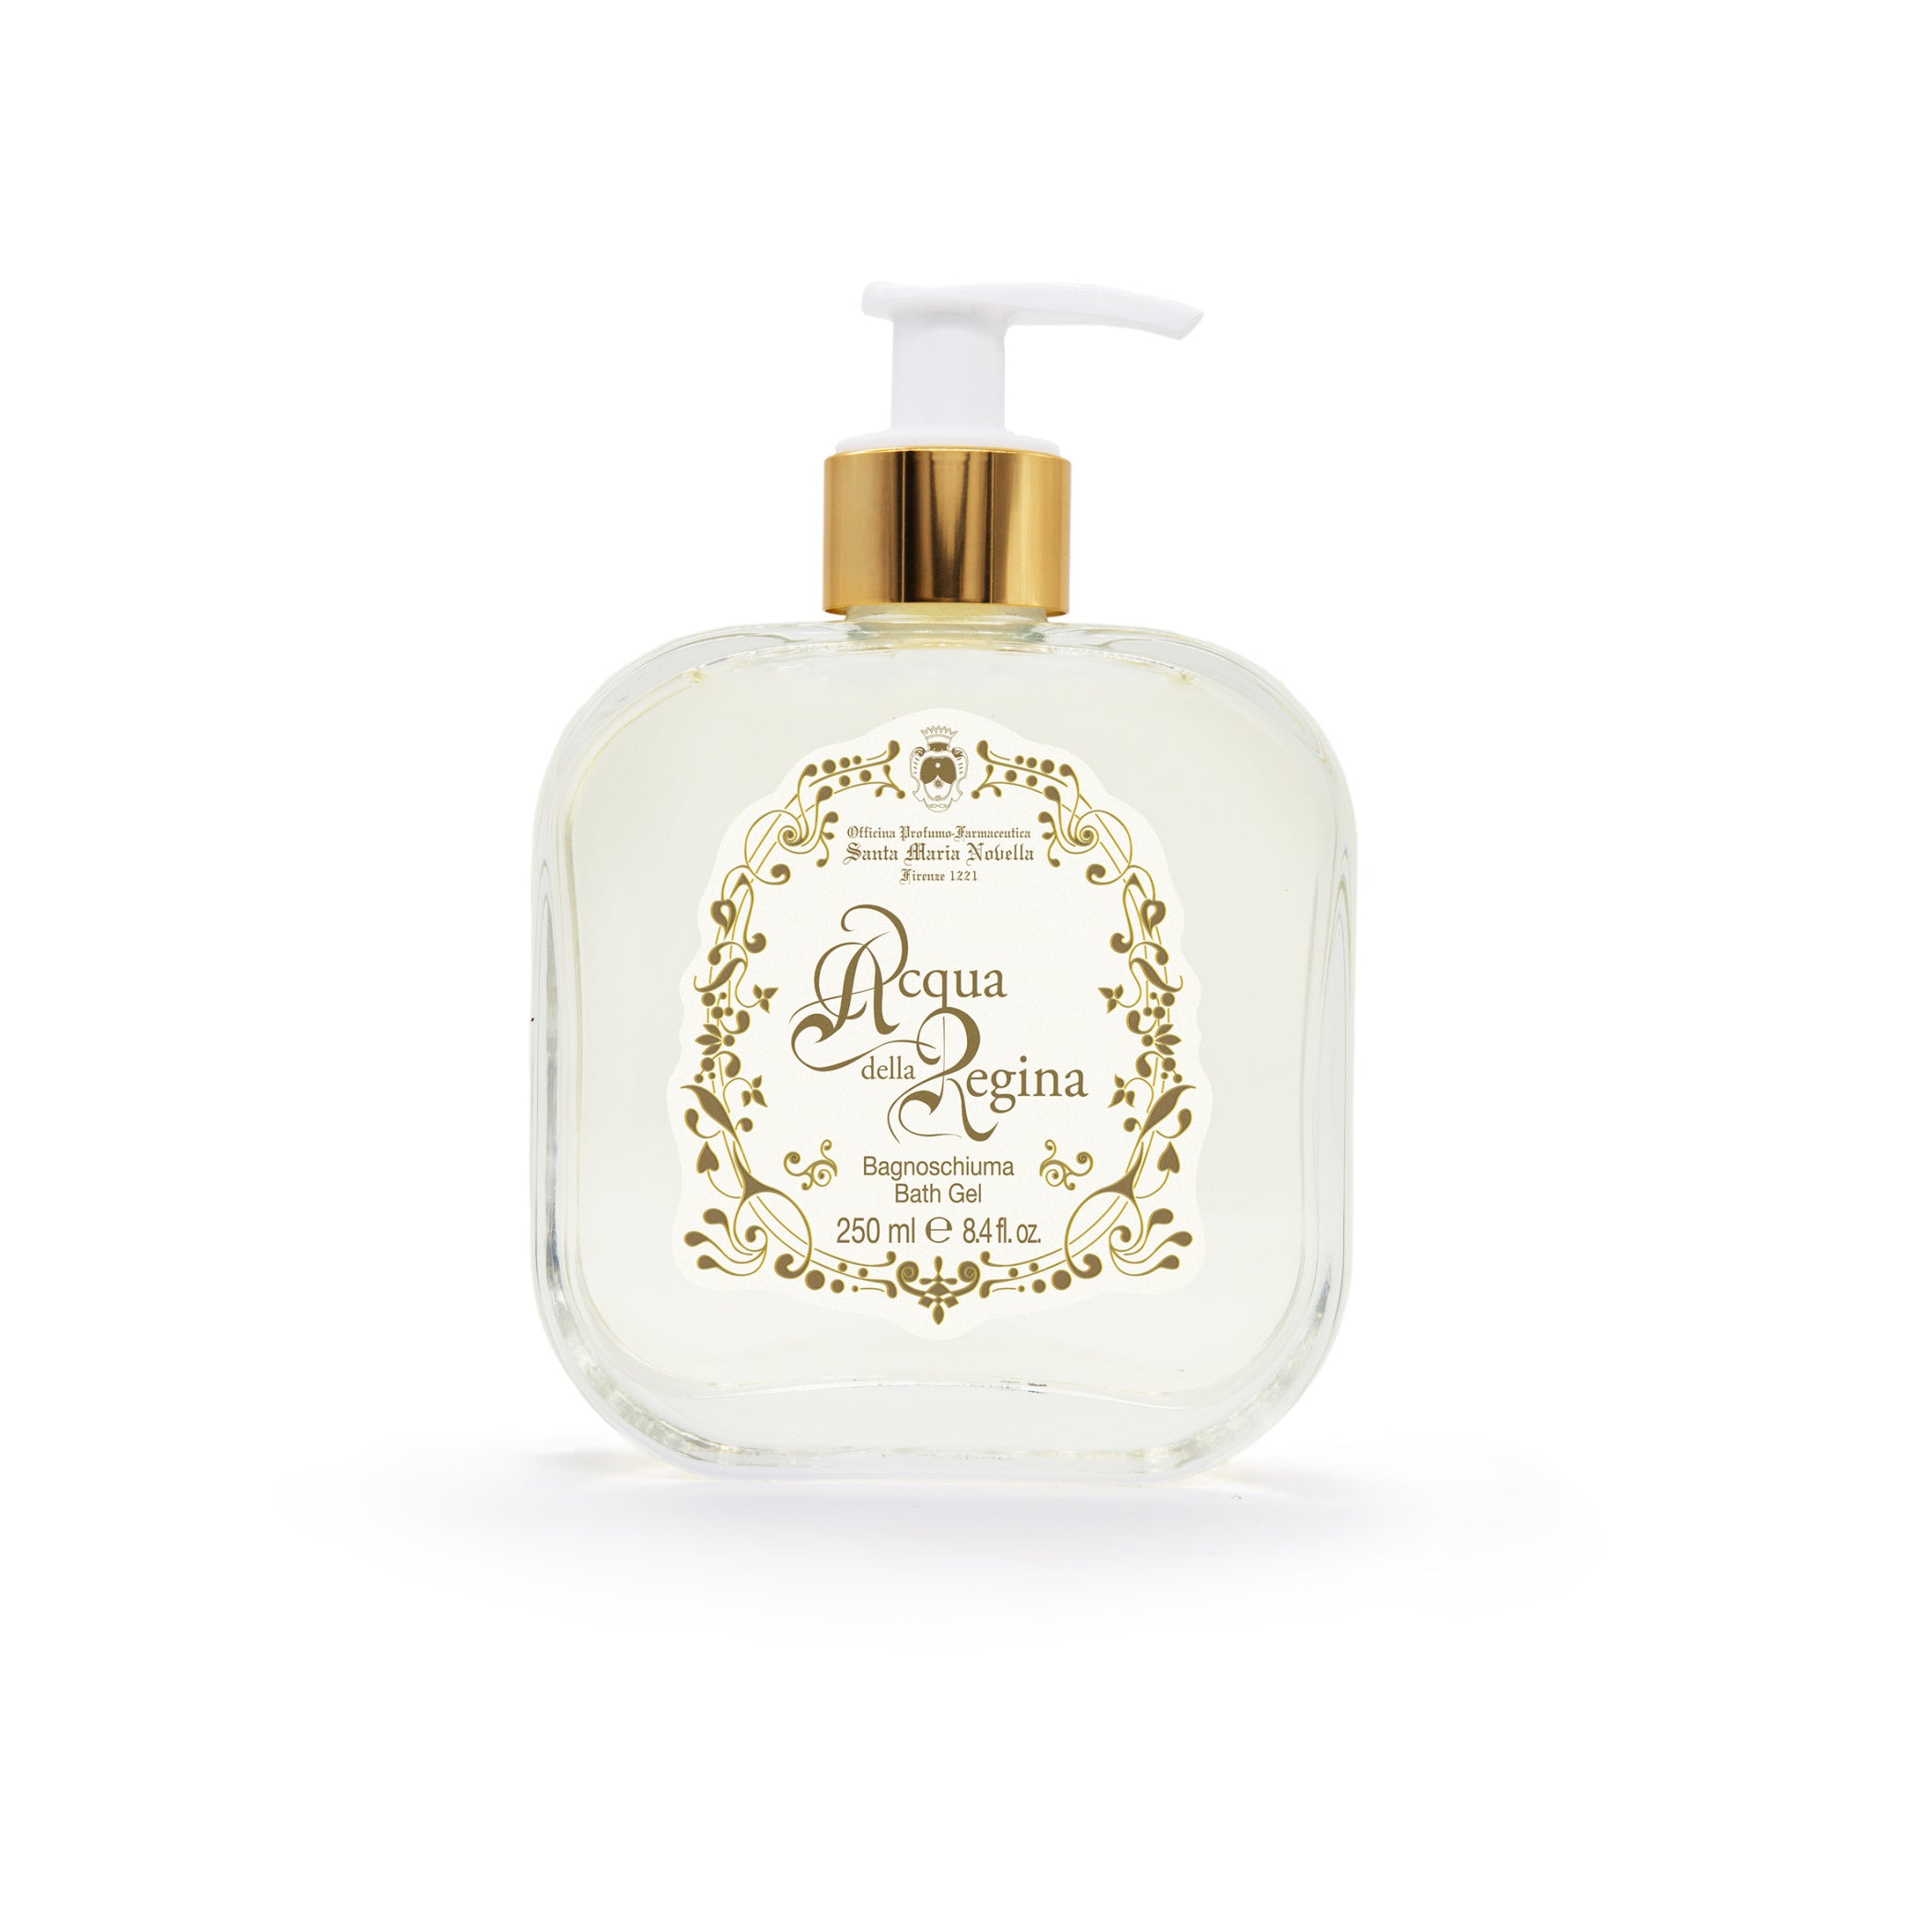 Body Care Firenze 1221 - リキッドソープ